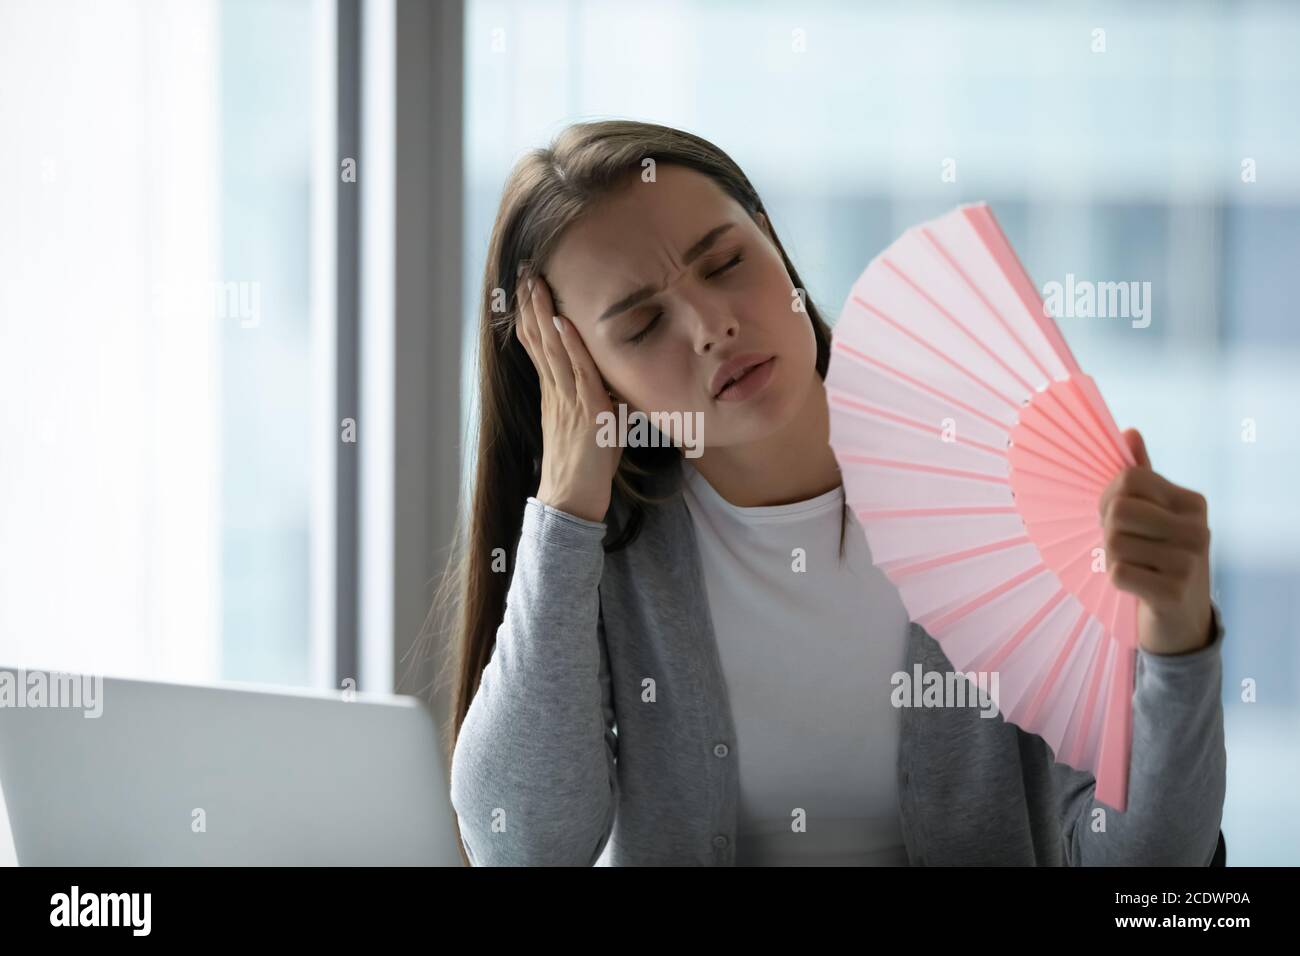 Overheated unhappy young businesswoman waving paper fan in office Stock Photo